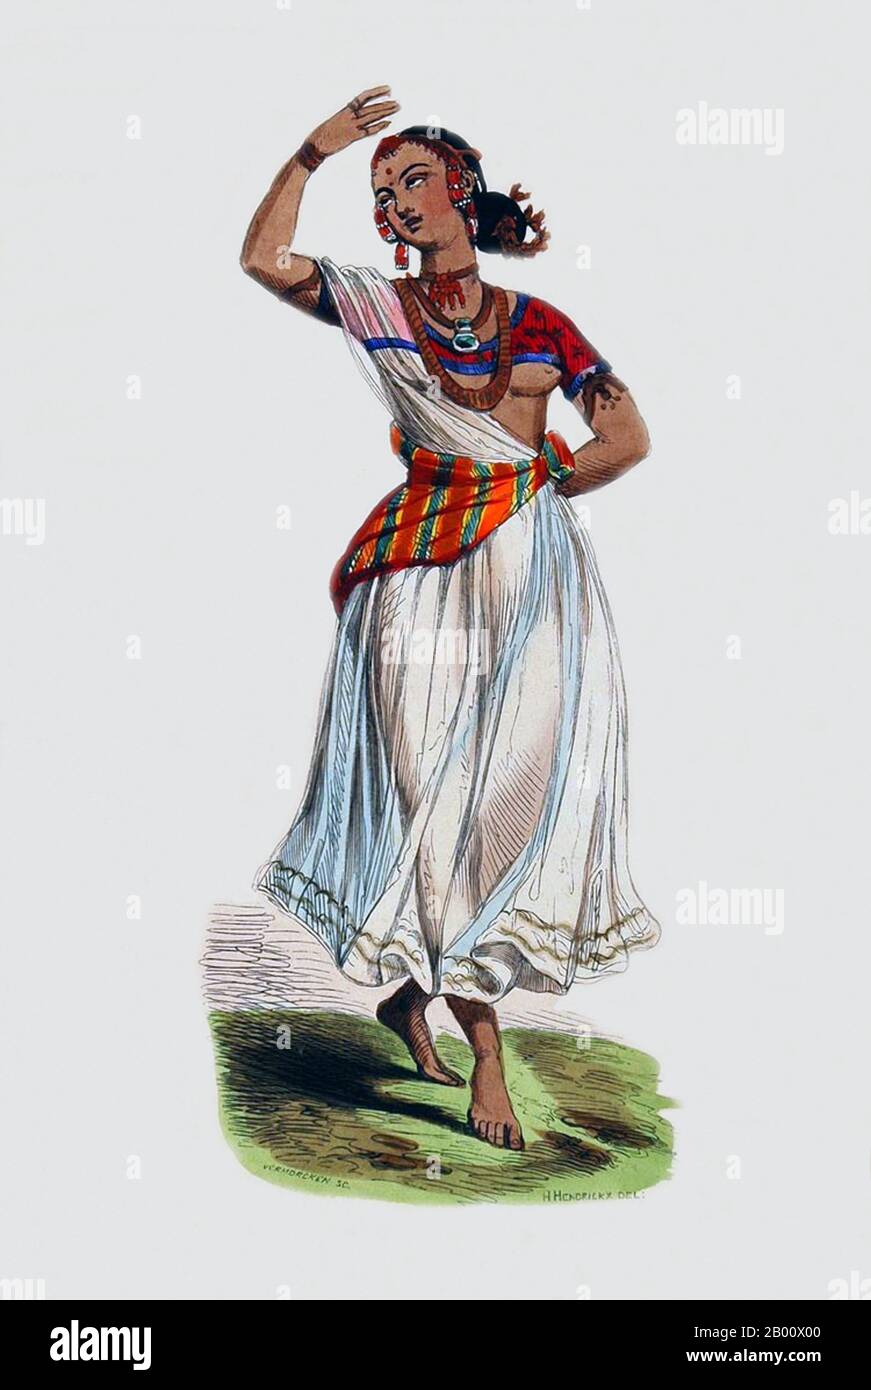 India/Belgium: 'A Dancing Girl/Bayadere'. Hand-coloured engraving by Auguste Wahlen (1785-1849), 1843.  A hand-coloured engraving from Auguste Wahlen's 'Moeurs, Usages, et Costumes de tous les Peuples de Monde, d'apres des Documents Authentiques et les Voyages les plus Recents' (Manners, Customs and Costumes of all the Peoples of the World taken from Authentic Documents and the Most Recent Travels). Stock Photo